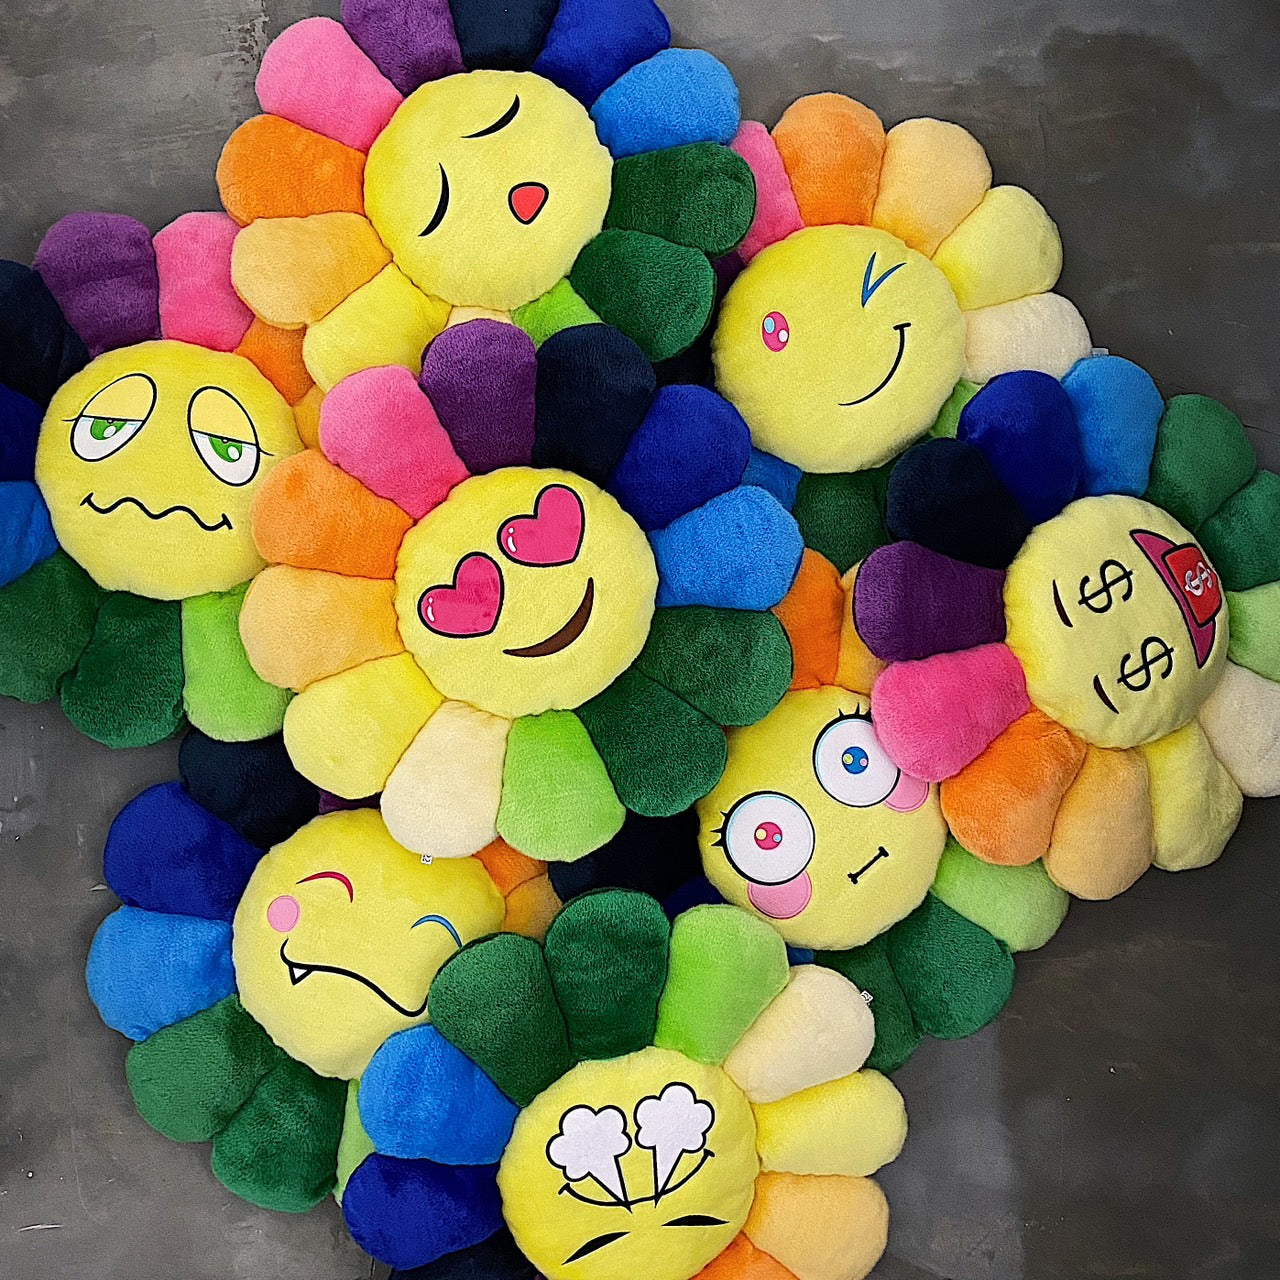 【Store limited release / STORE'S ONLY】<br> 「©Takashi Murakami / kaikai kiki」rainbow flower cushions are now on sale!